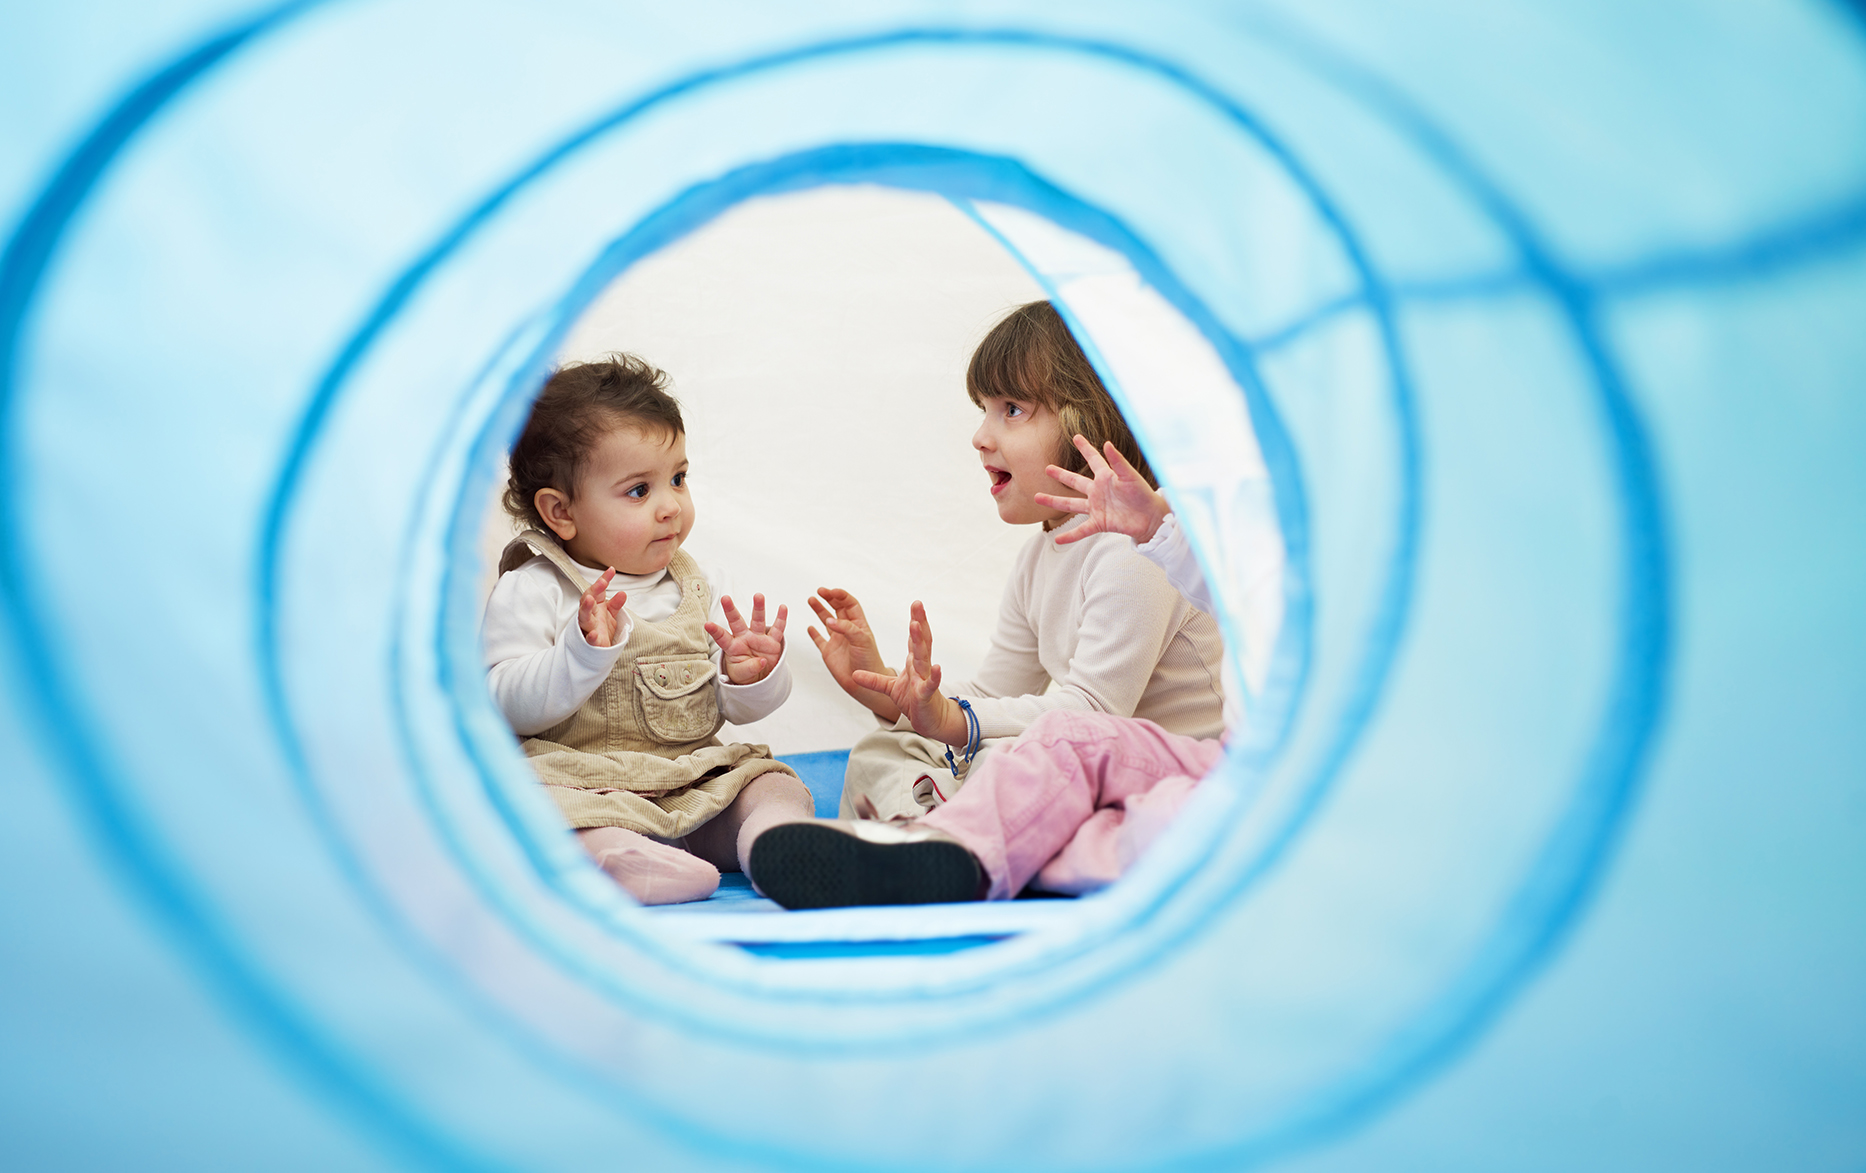 How to Clean Play Tents and Tunnels